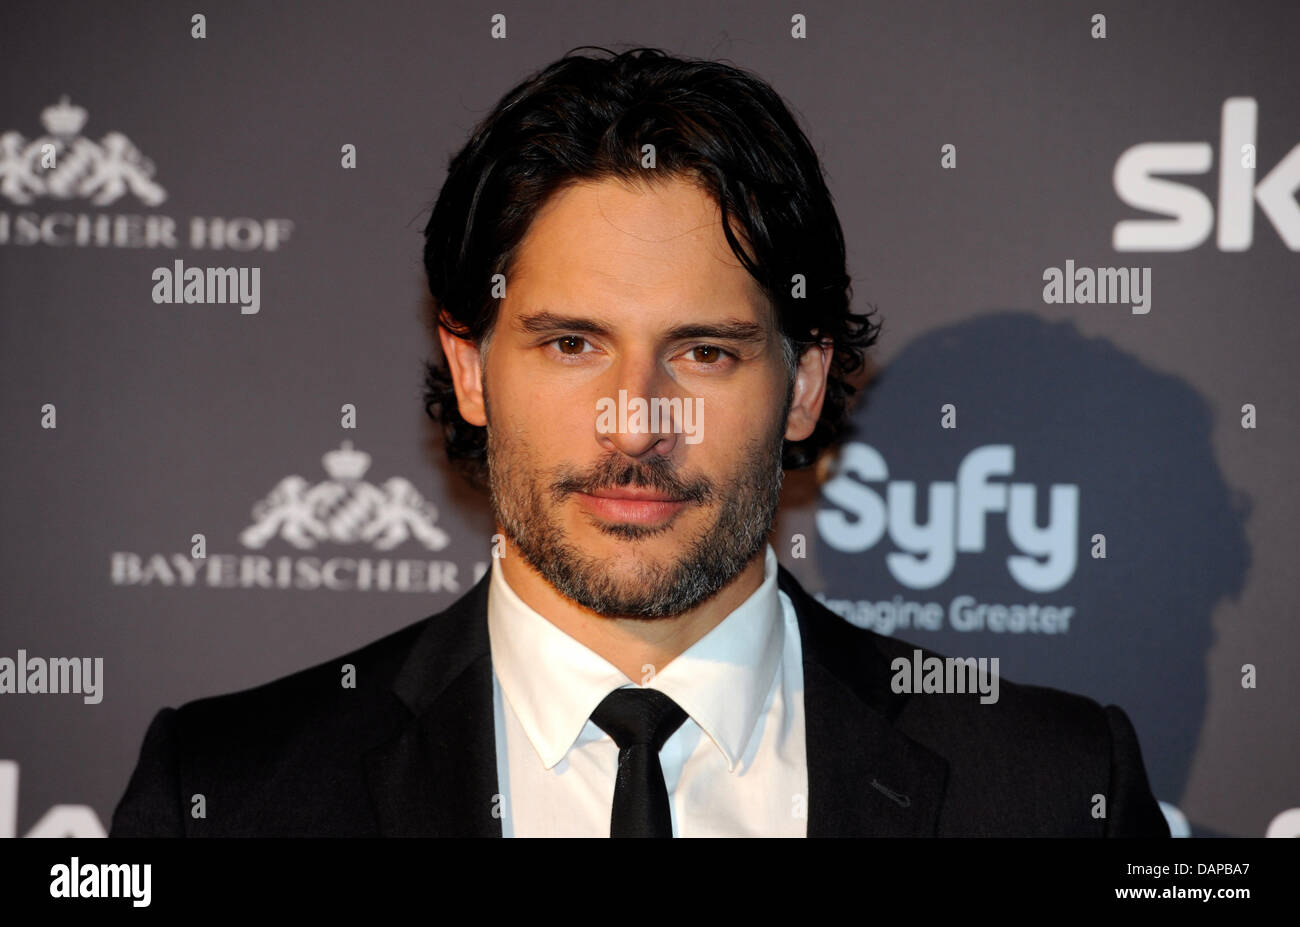 The protagonist Joe Manganiello arrives for the German premiere of the fourth season of the series 'True Blood' in Munich, Germany, 08 August 2011. The fourth season of the US-series will be aired in Germany beginning of 2012 on Syfy. Photo: Tobias Hase Stock Photo